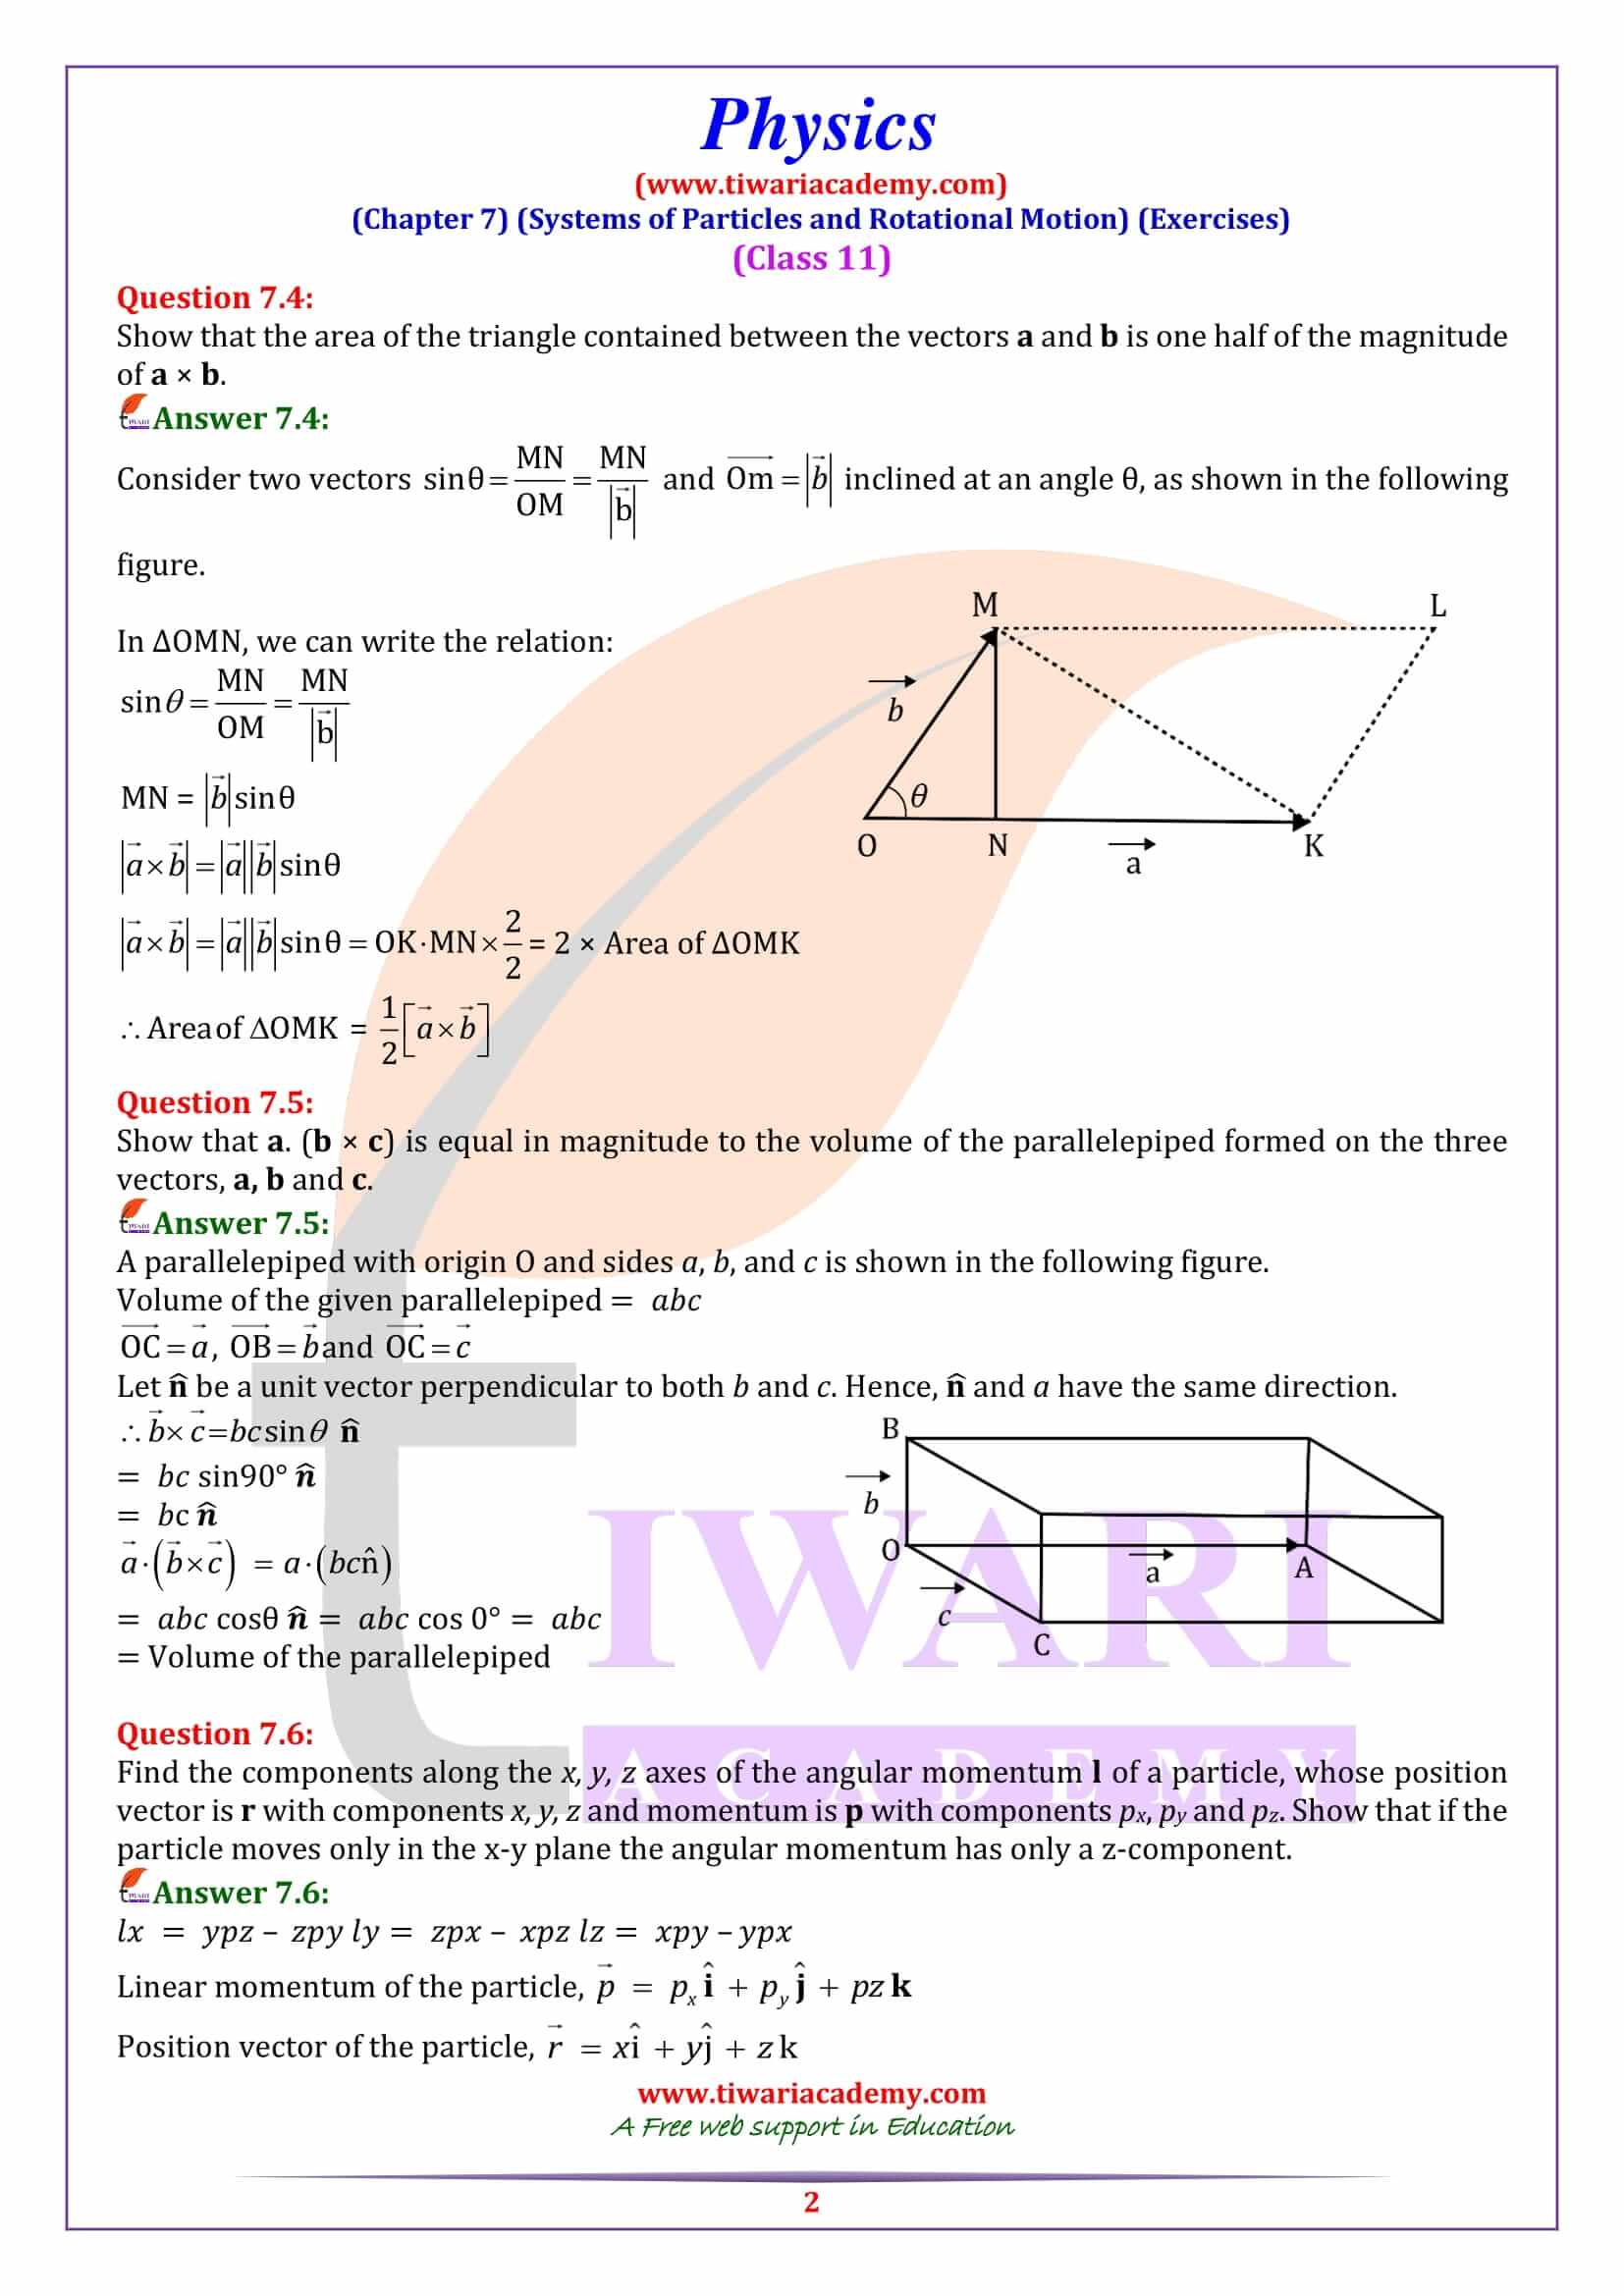 Class 11 Physics Chapter 7 Exercises Question Answers